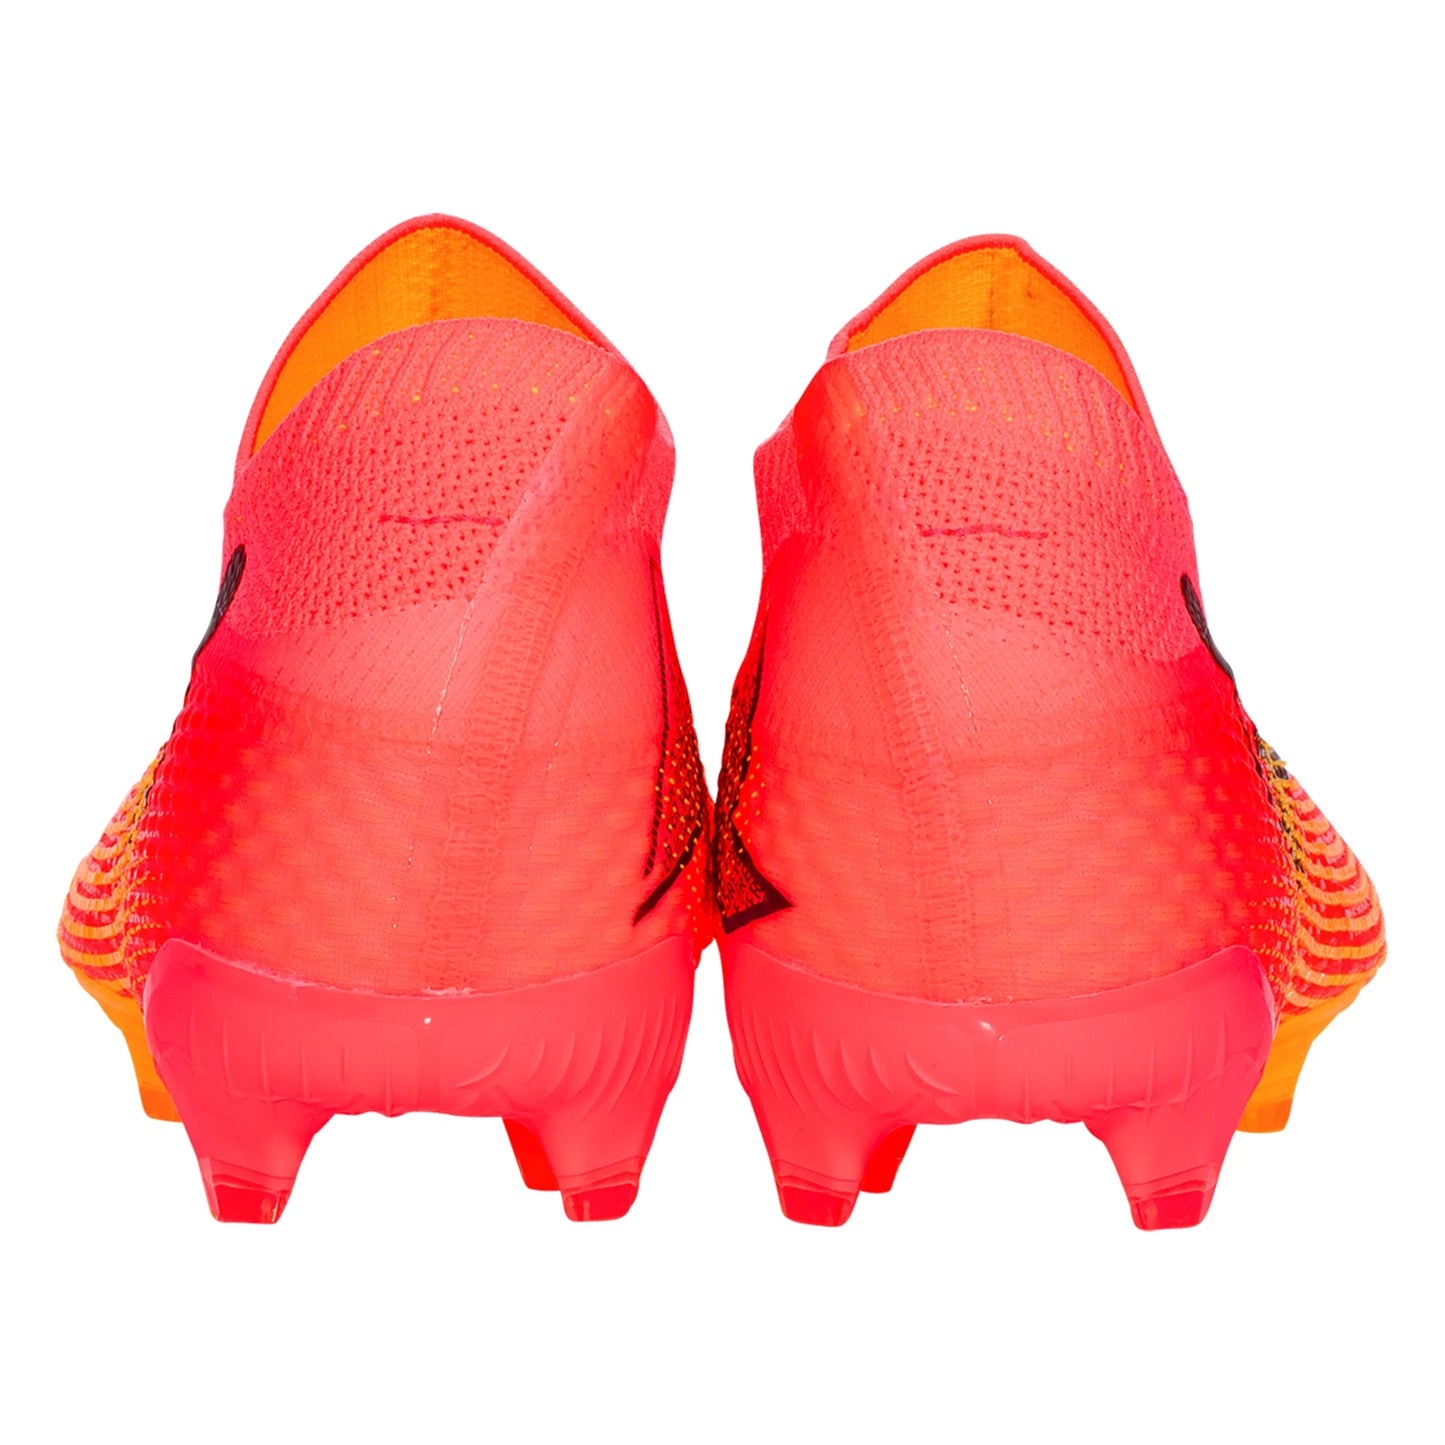 Puma Future 7 Ultimate FG/AG Firm Ground Soccer Cleat